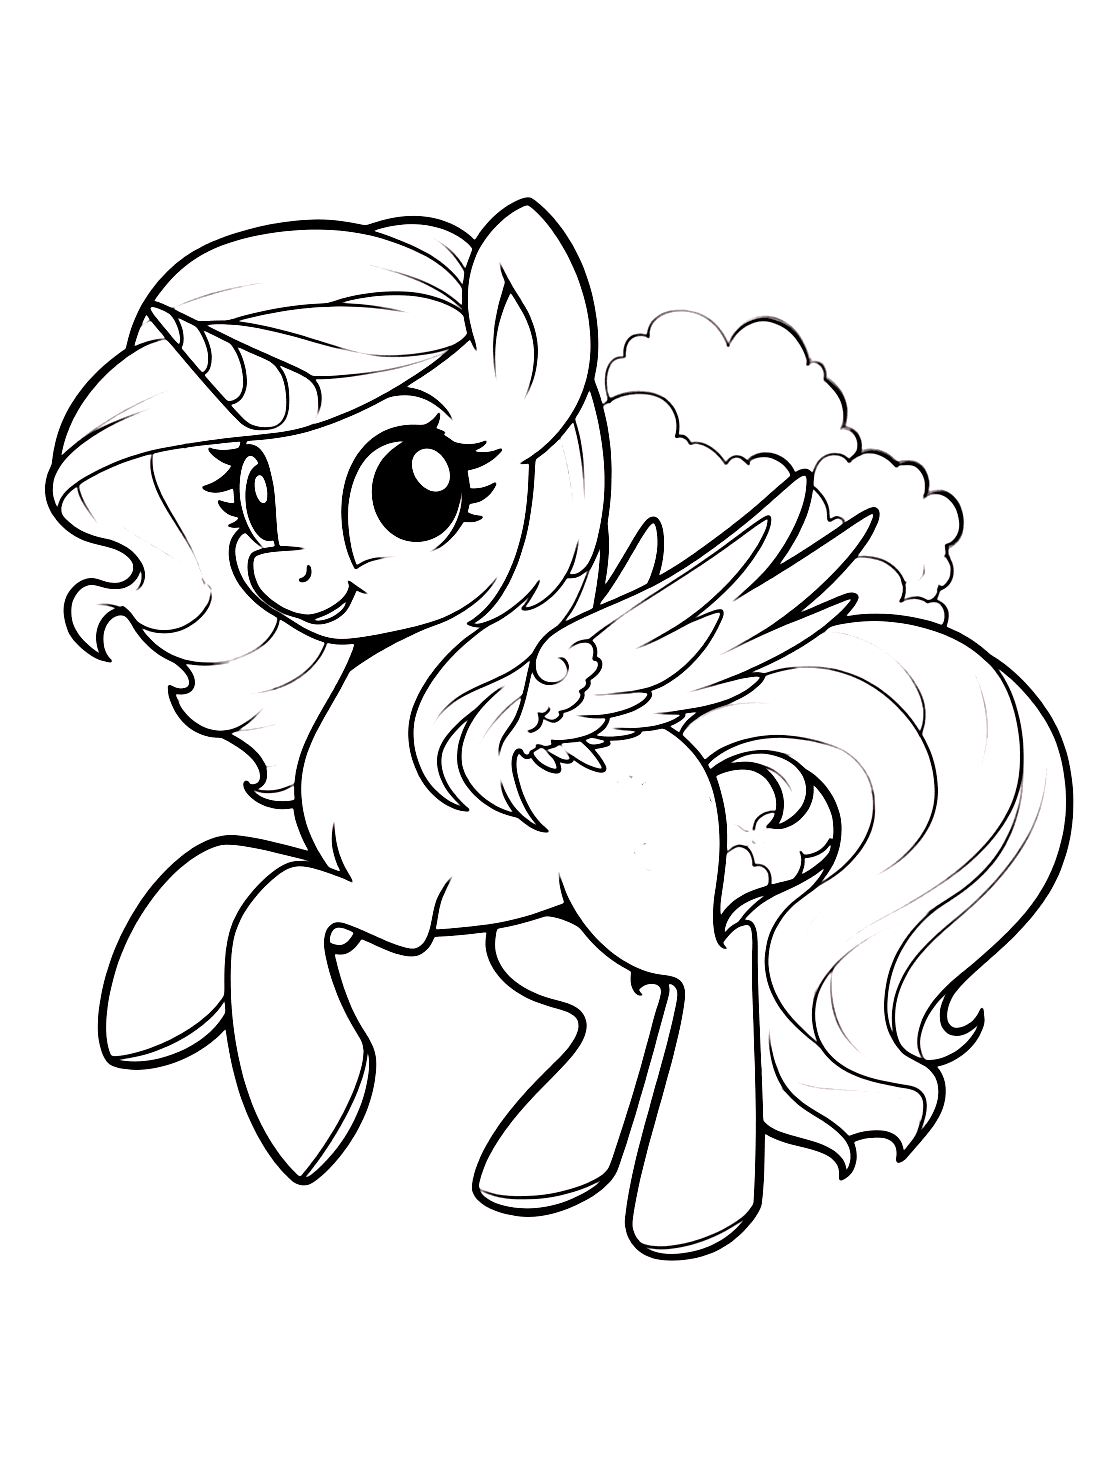 Princess Rainbow Dash Coloring Pages to Print